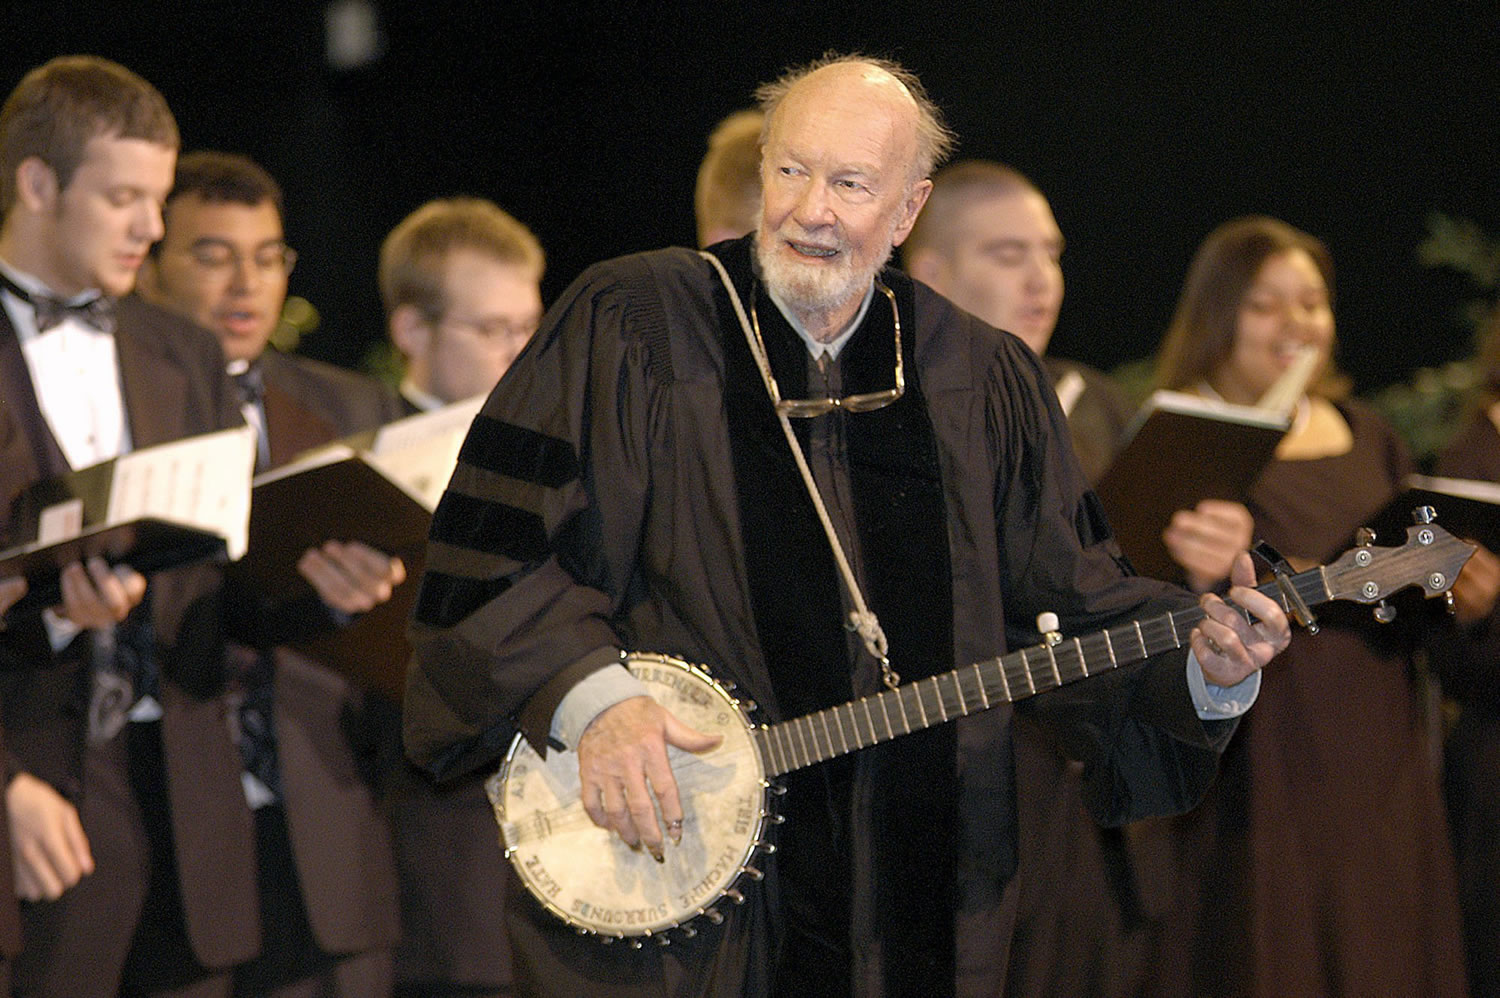 File-This May 10, 2003 file photo shows folk singer Pete Seeger performing&quot;When the Saints Go Marching In&quot; with the Saint Rose Chamber Singers during commencement ceremonies for the College of St. Rose at the Empire State Plaza in Albany, N.Y.   The American troubadour, folk singer and activist Seeger  died Monday Jan. 27, 2014, at age 94.